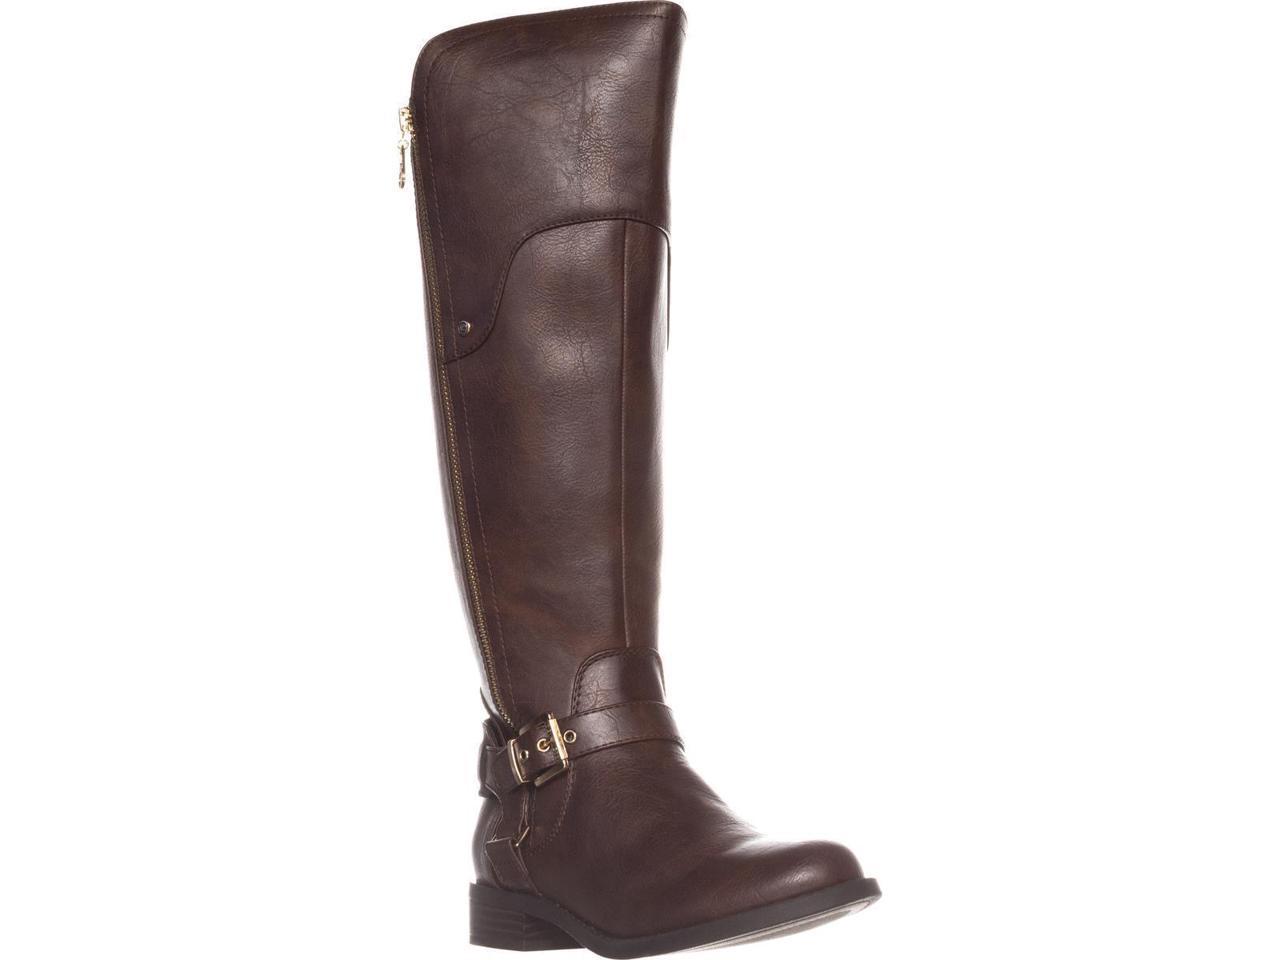 guess wide calf boots